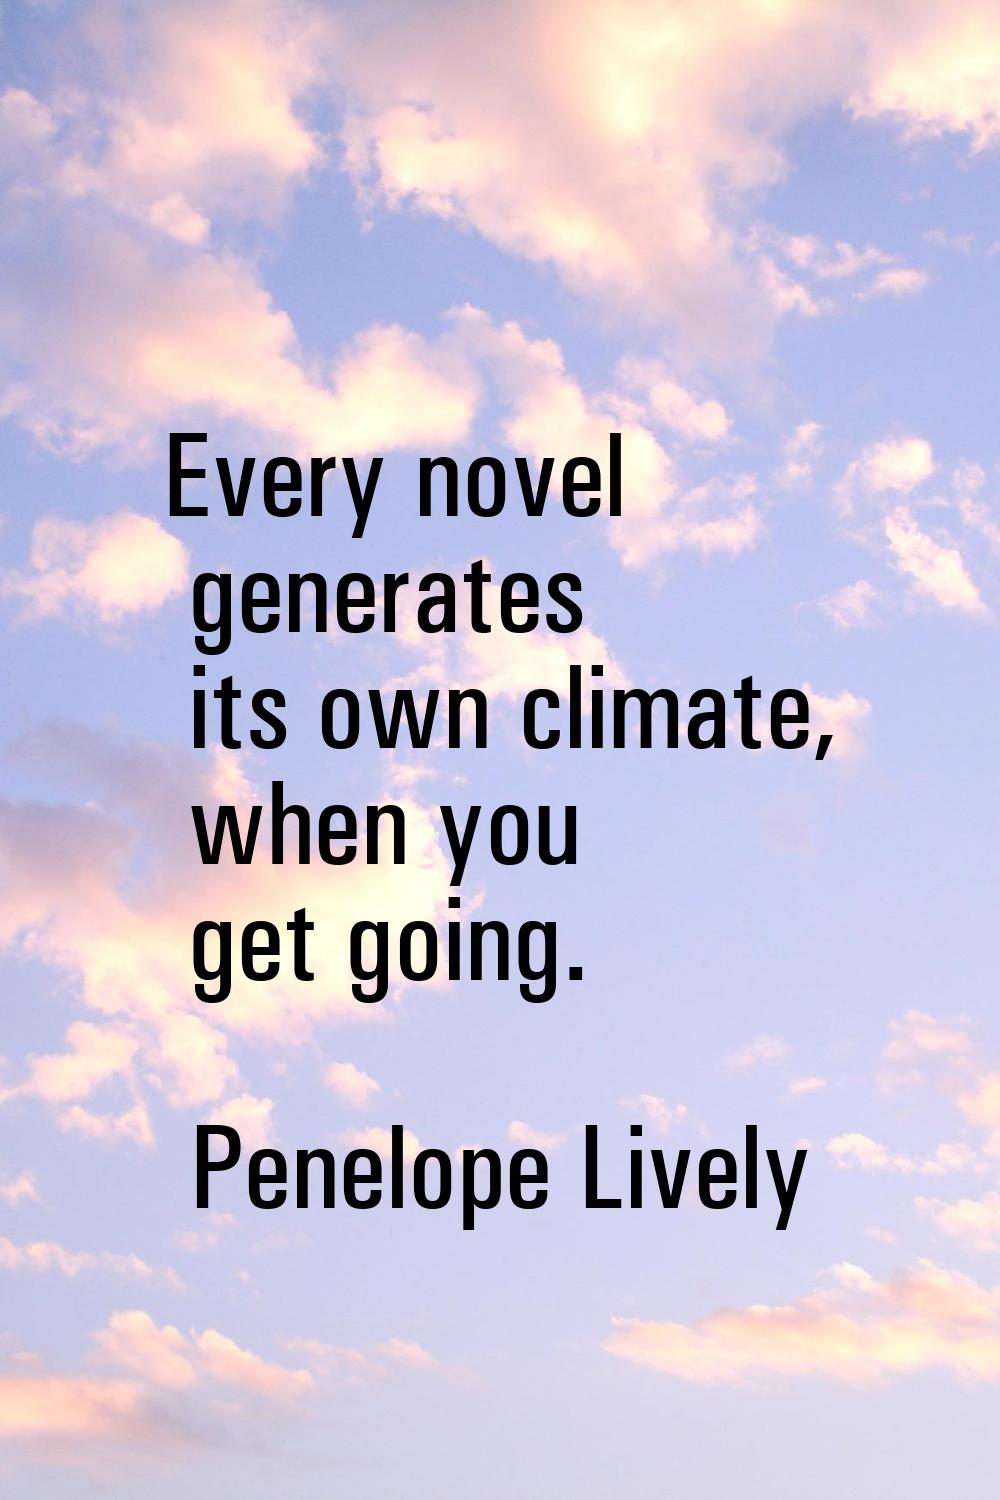 Every novel generates its own climate, when you get going.